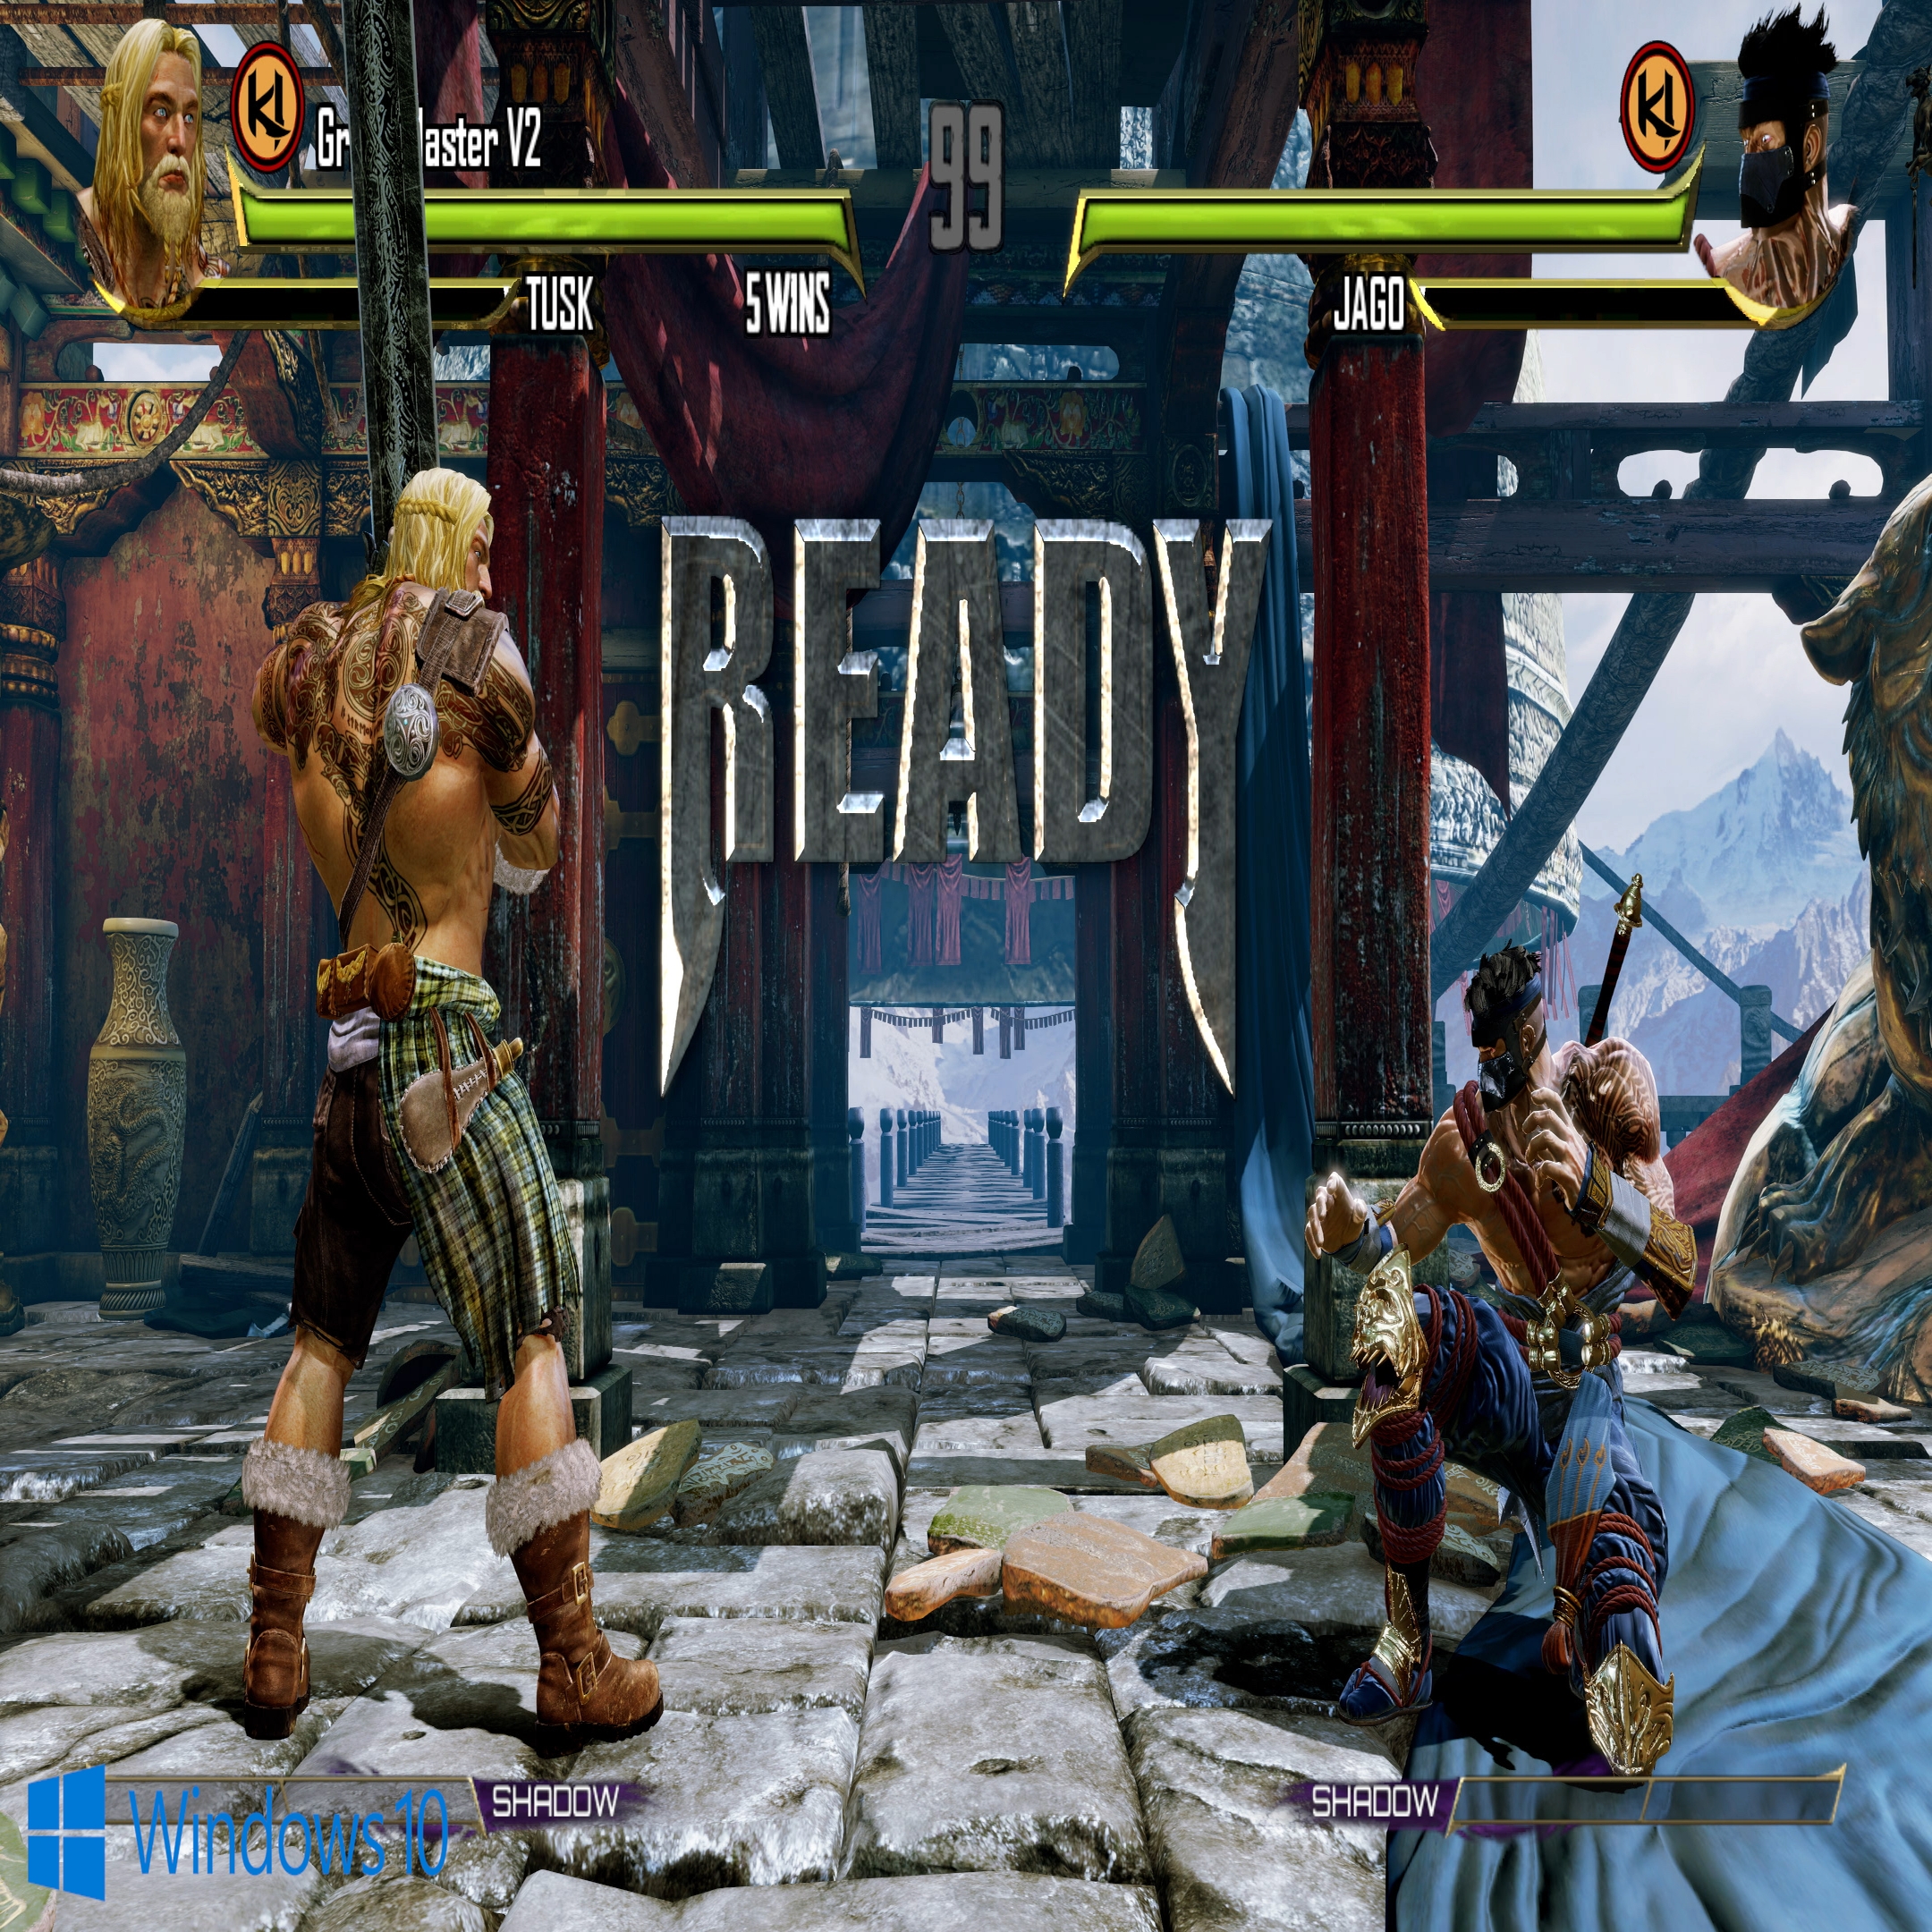 Killer Instinct is now available on Steam, supports cross-play with Xbox -  Neowin